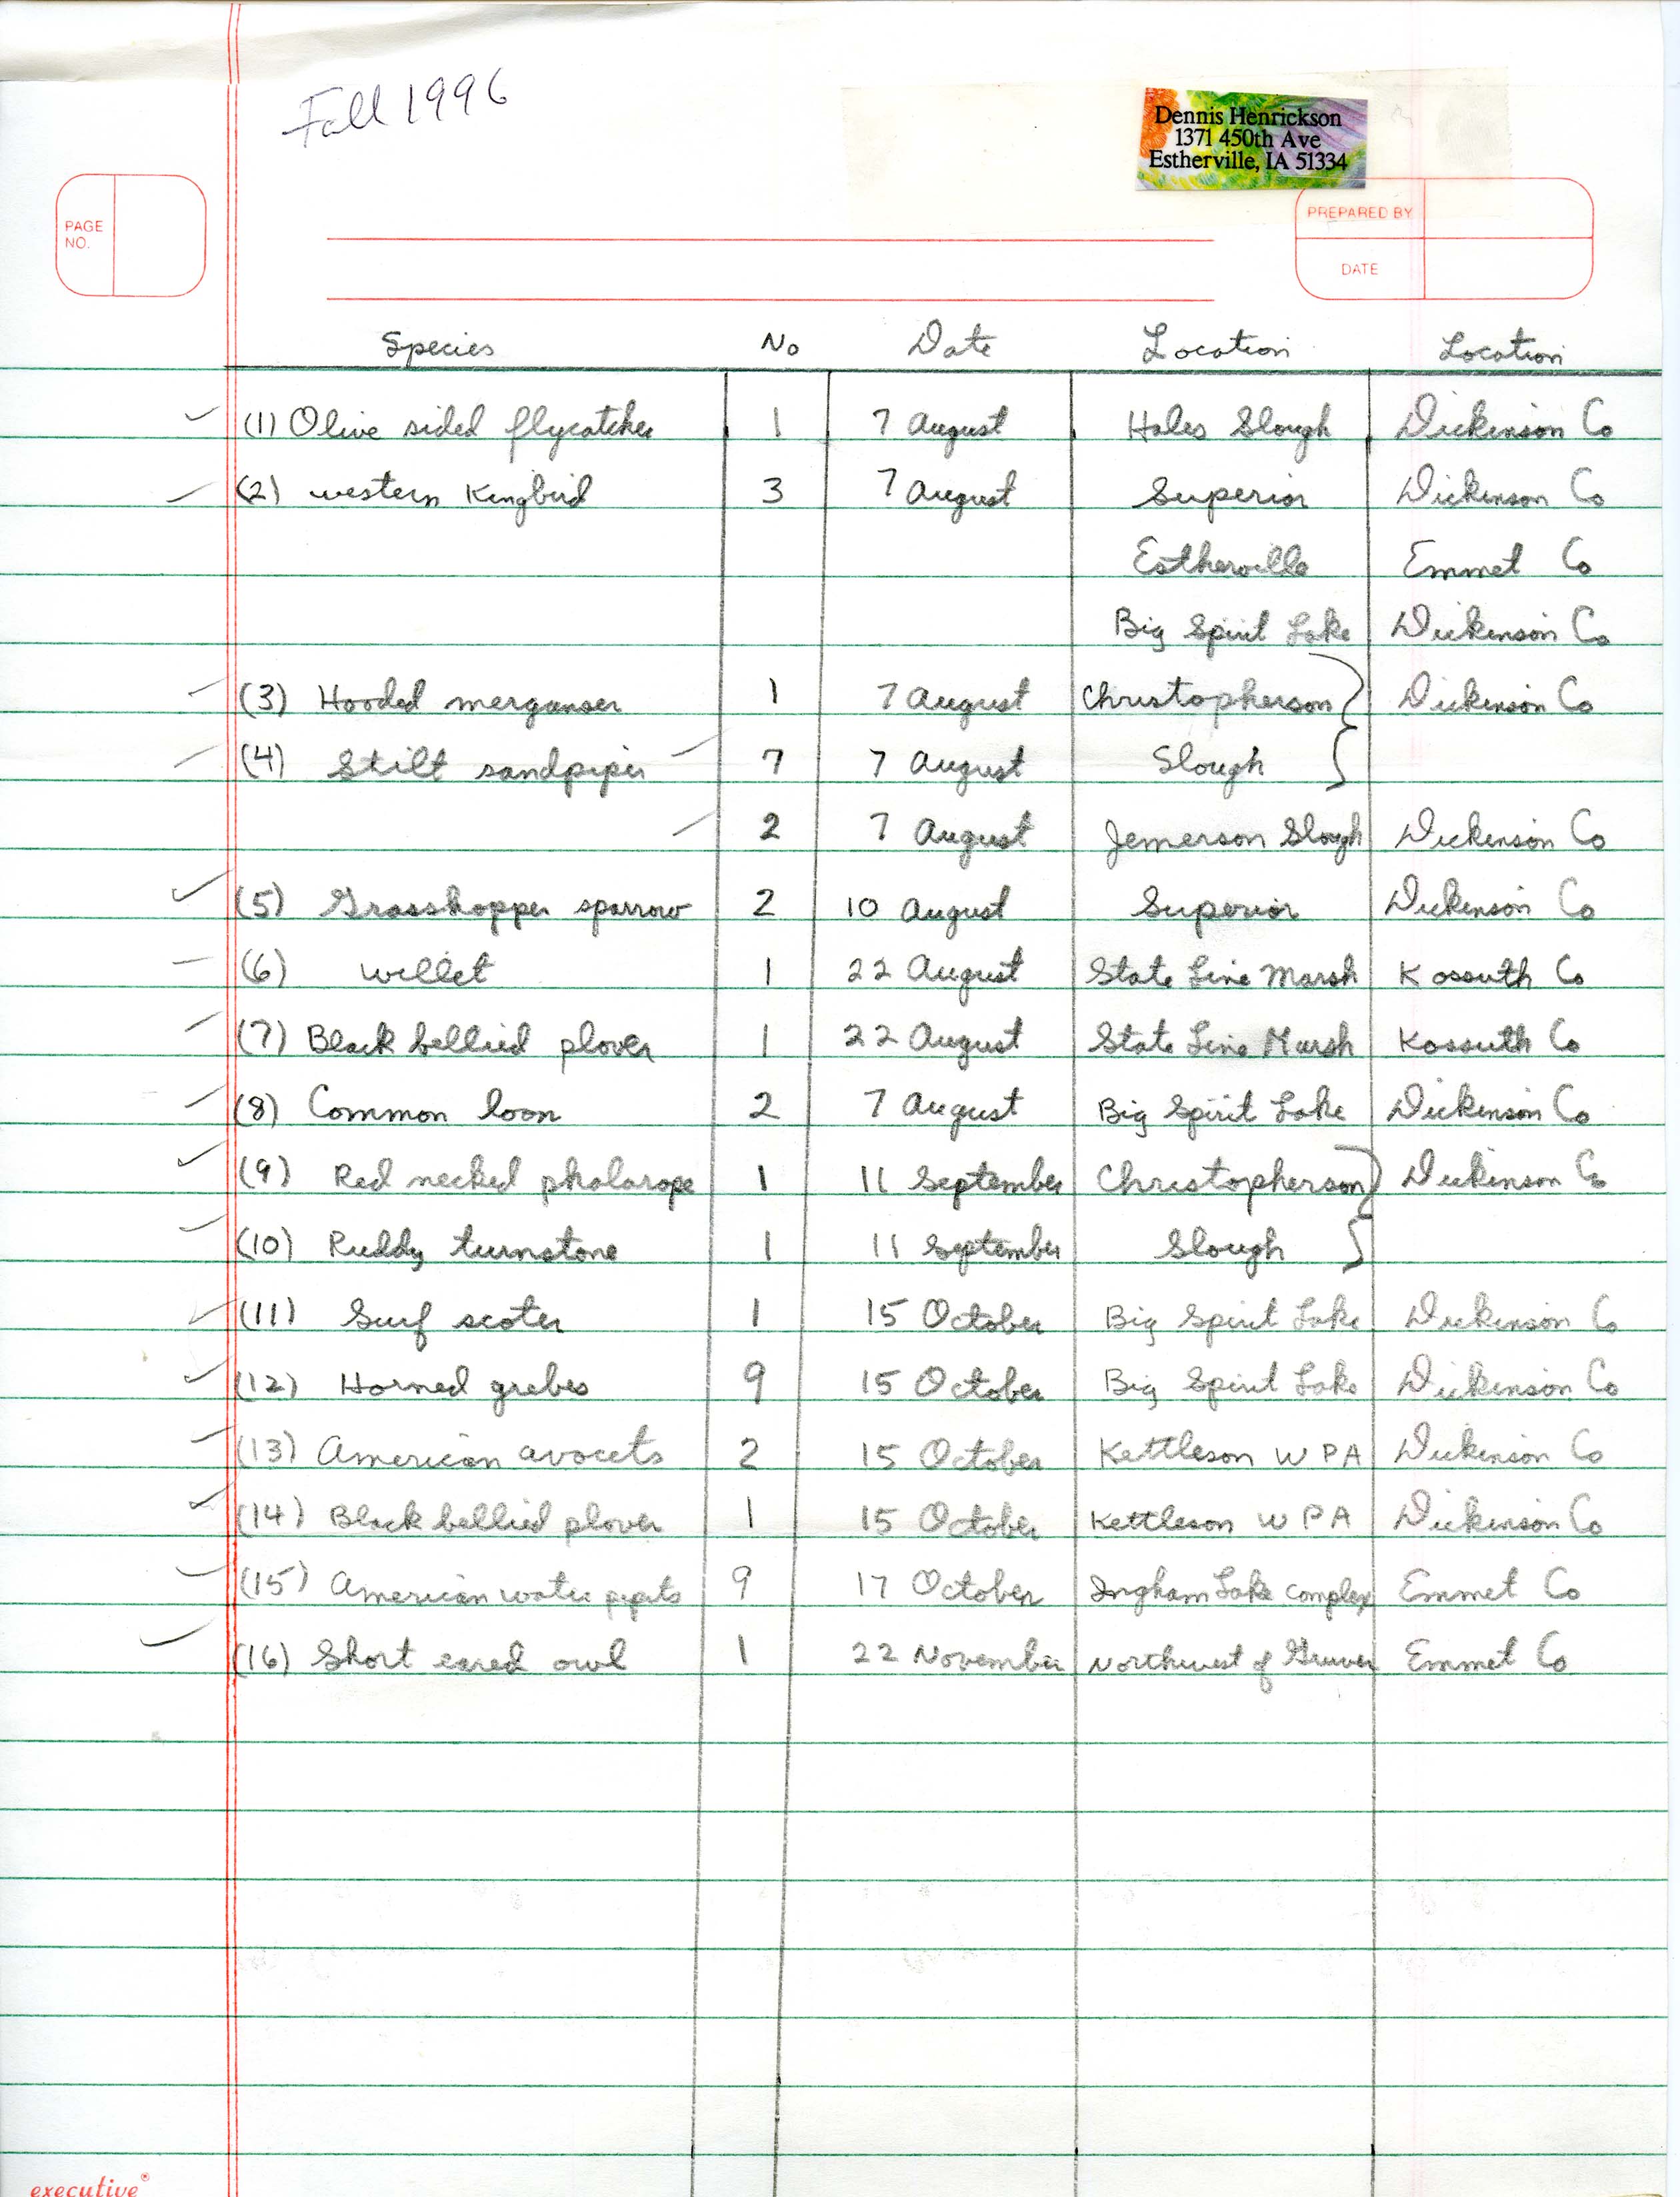 Field notes contributed by Dennis Henrickson, fall 1996